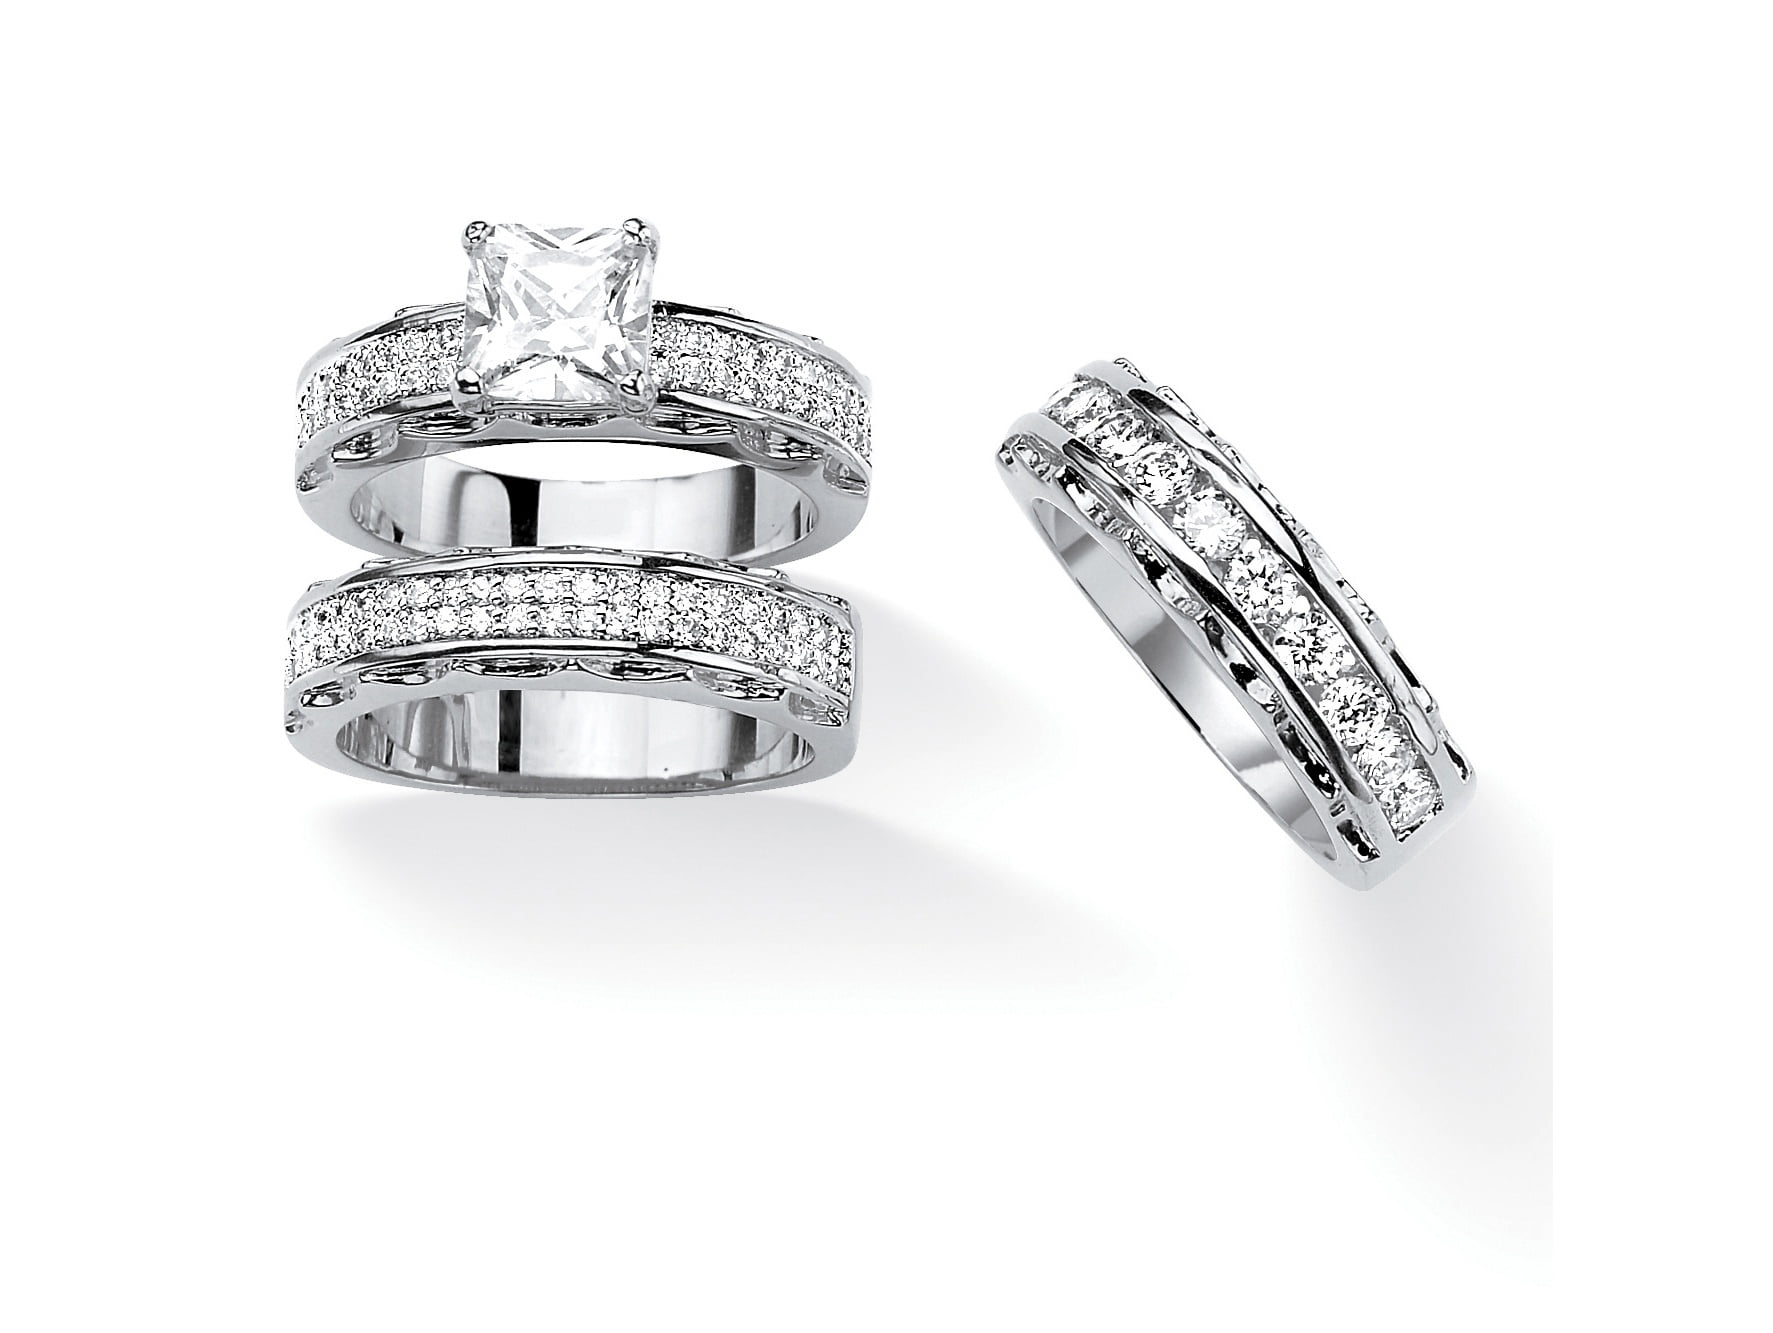 TVS-JEWELS White Gold Plated Round Cut Cubic Zirconia His & Her 3-pcs Anniversary Ring with Band Set